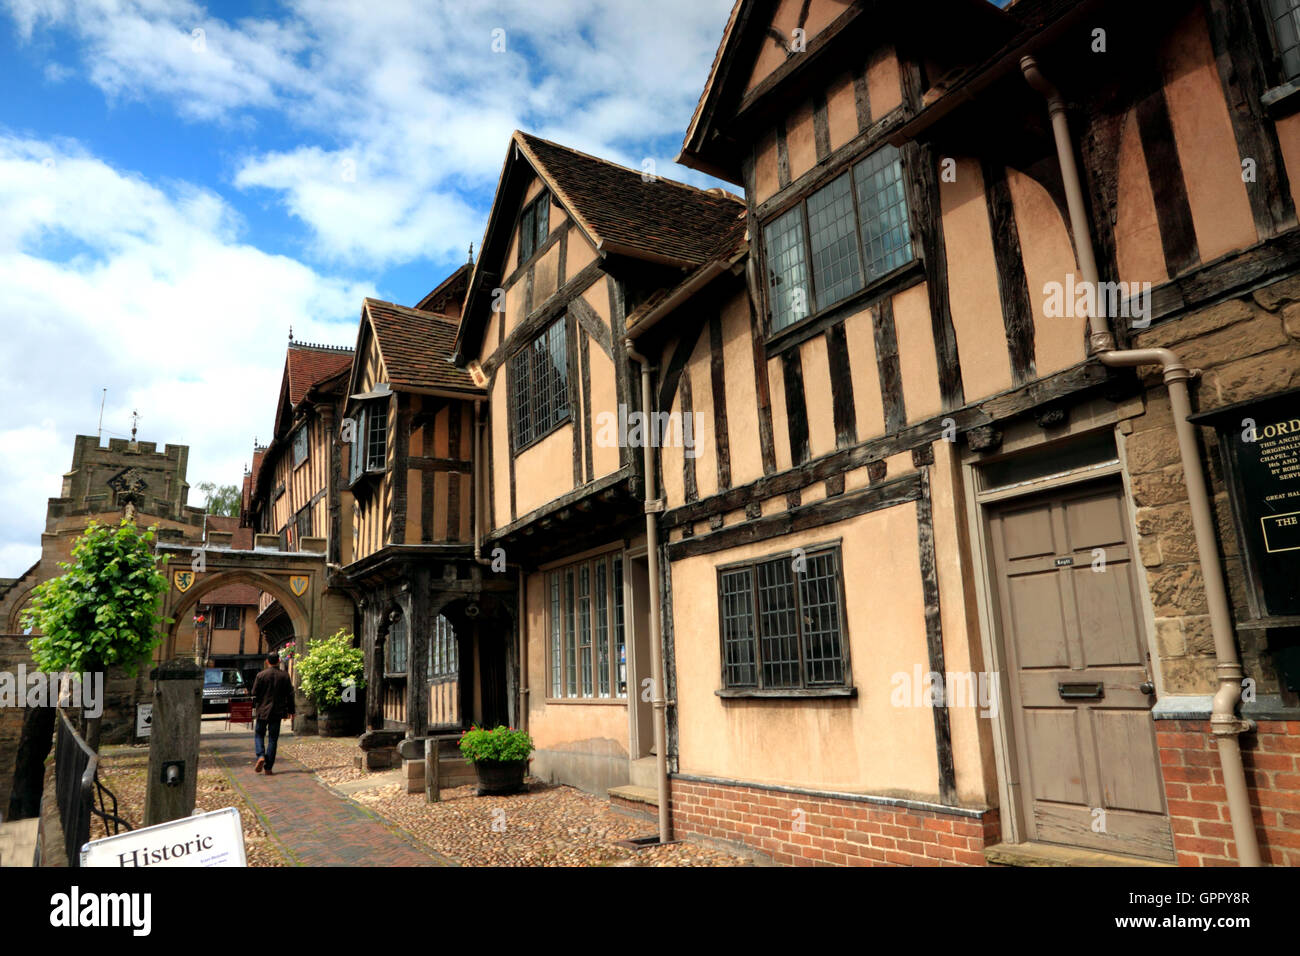 Half timbered buildings of the Lord Leycester Hospital, West Gate, Warwick. Stock Photo